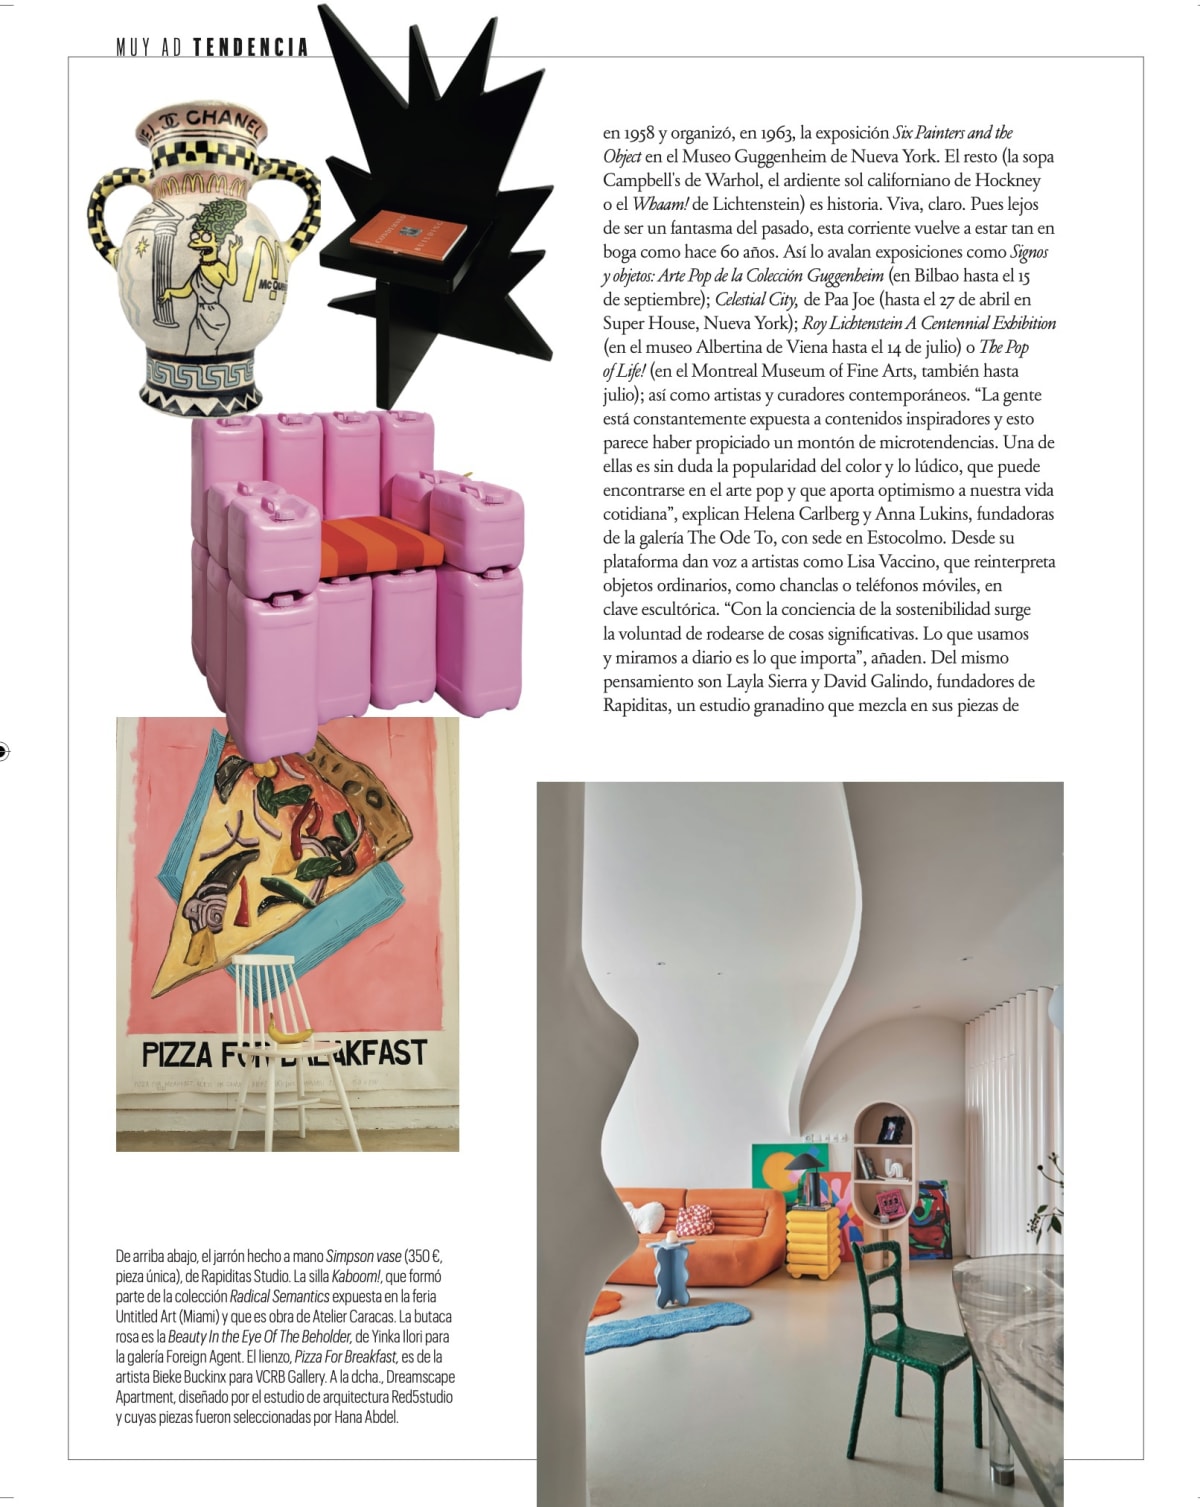 ¡VÁLGAME POP! , Yinka Ilori's 'Beauty In the Eye Of The Beholder' at Foreign Agent Gallery featured in AD Spain!